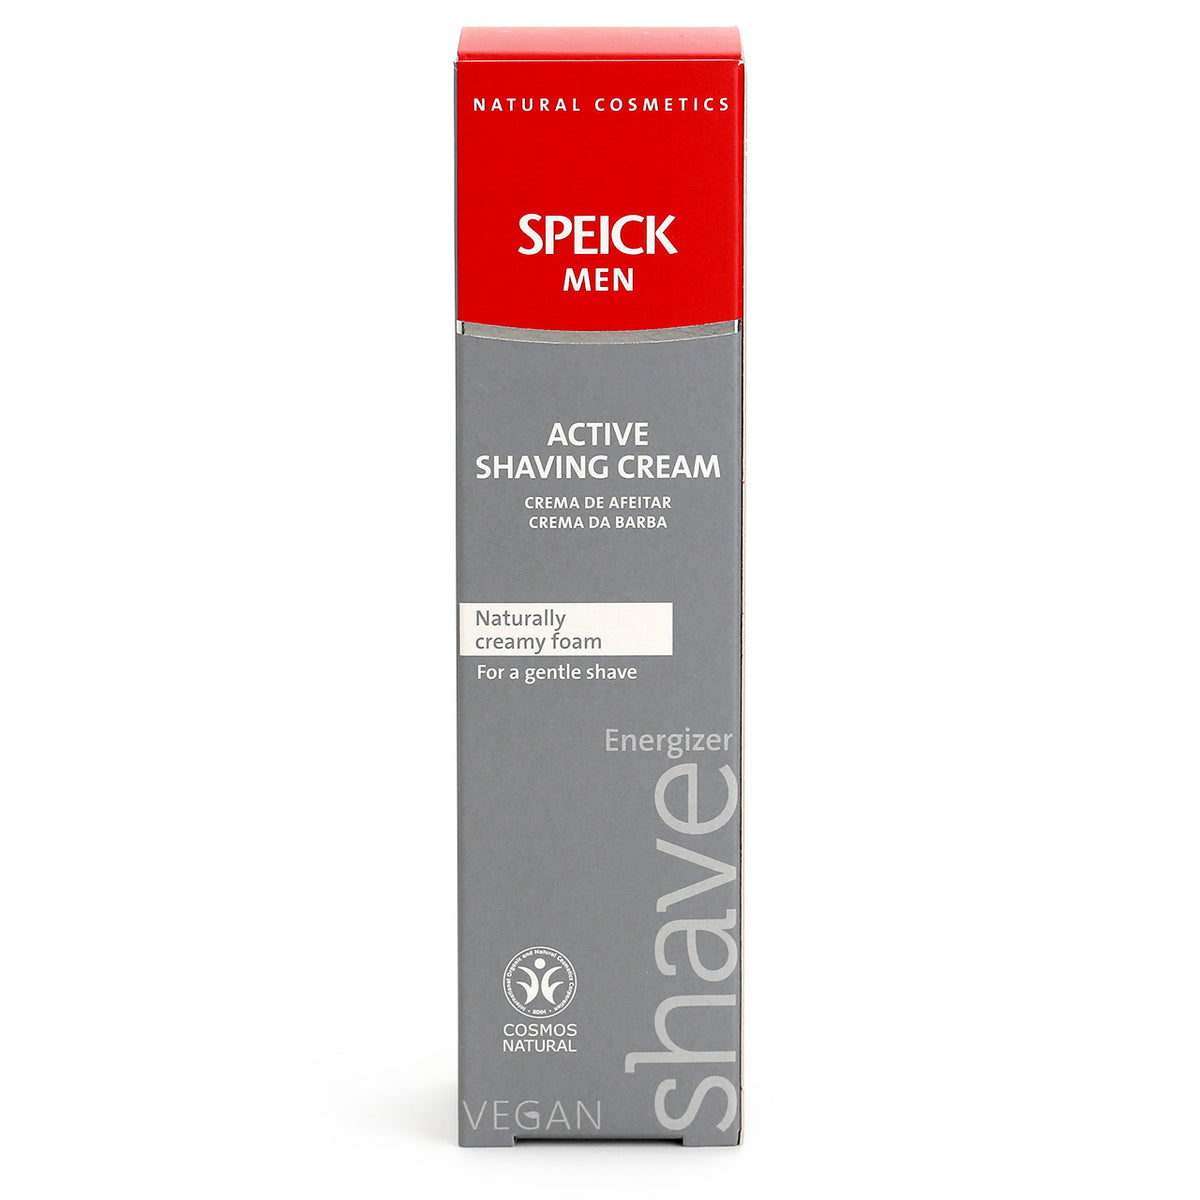 Speick Men Active Shaving Cream tube  - outer box in grey, red and white